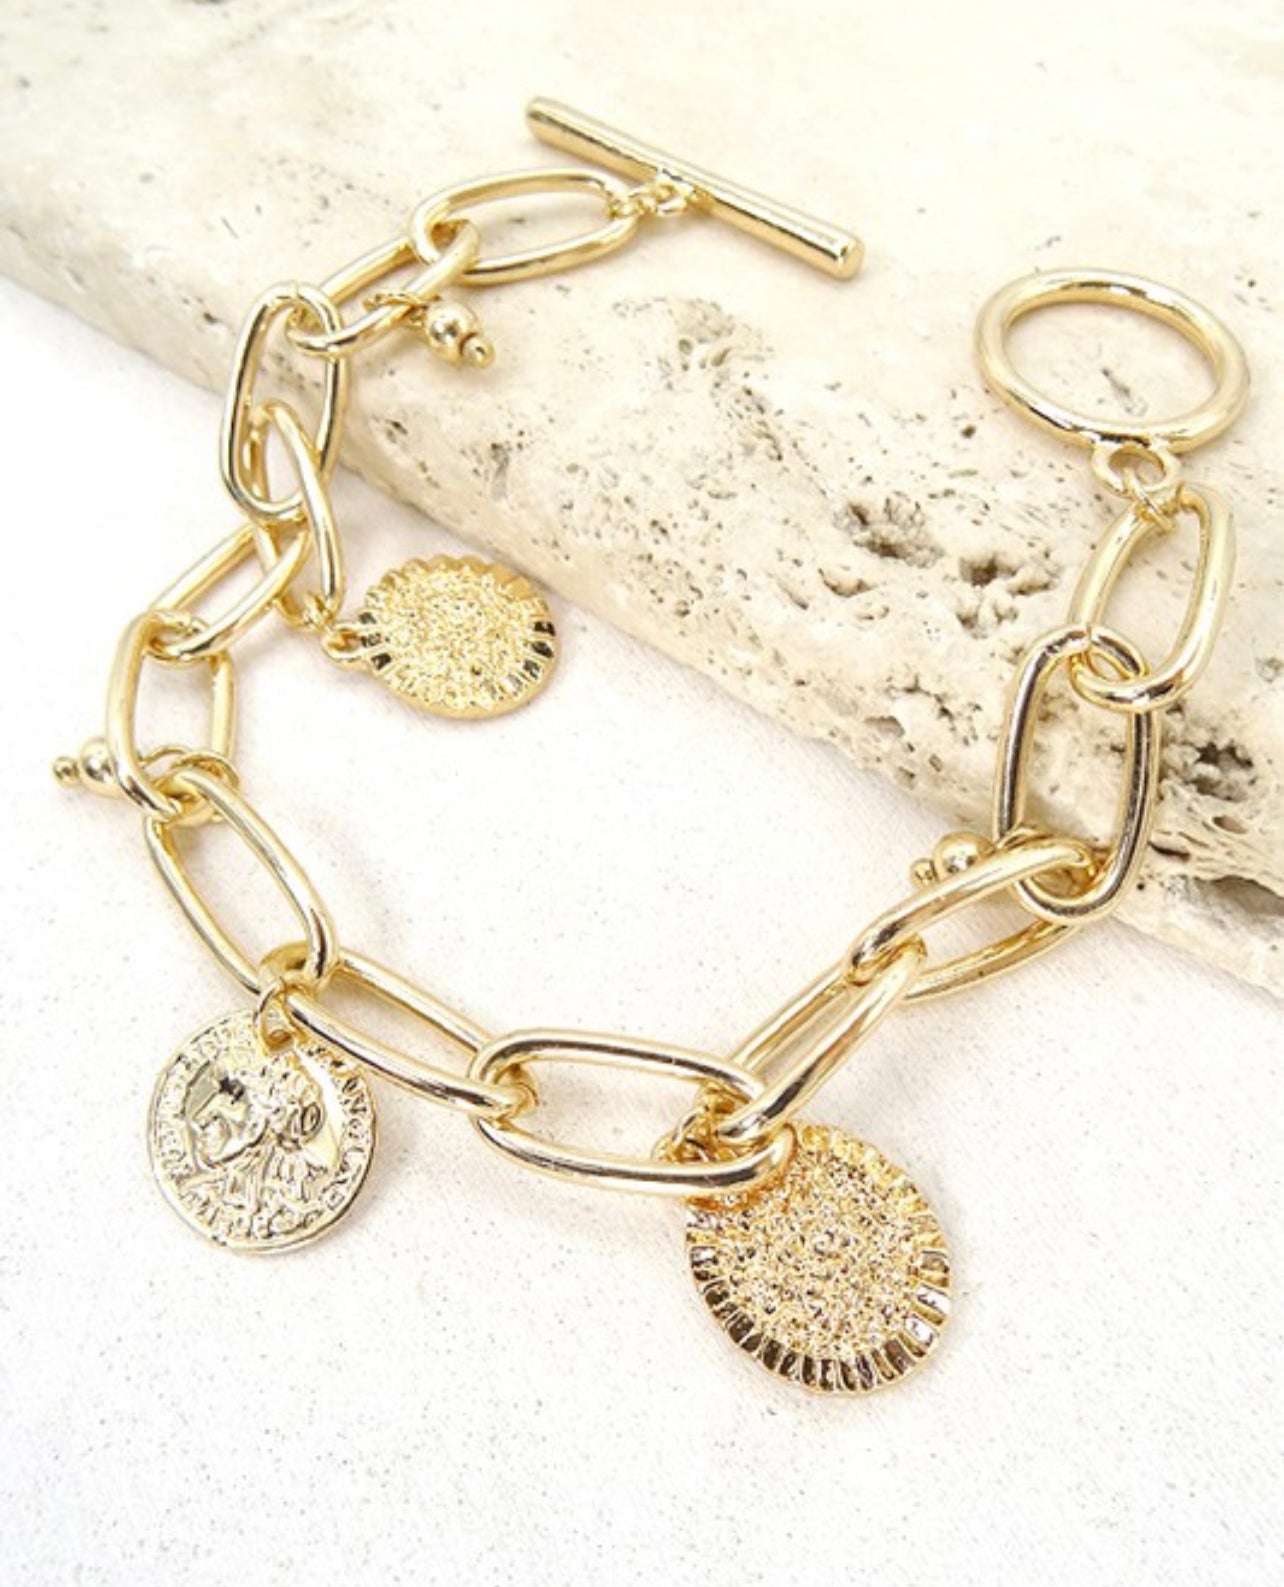 Paperclip Chain Link Bracelet with Charms - Gold